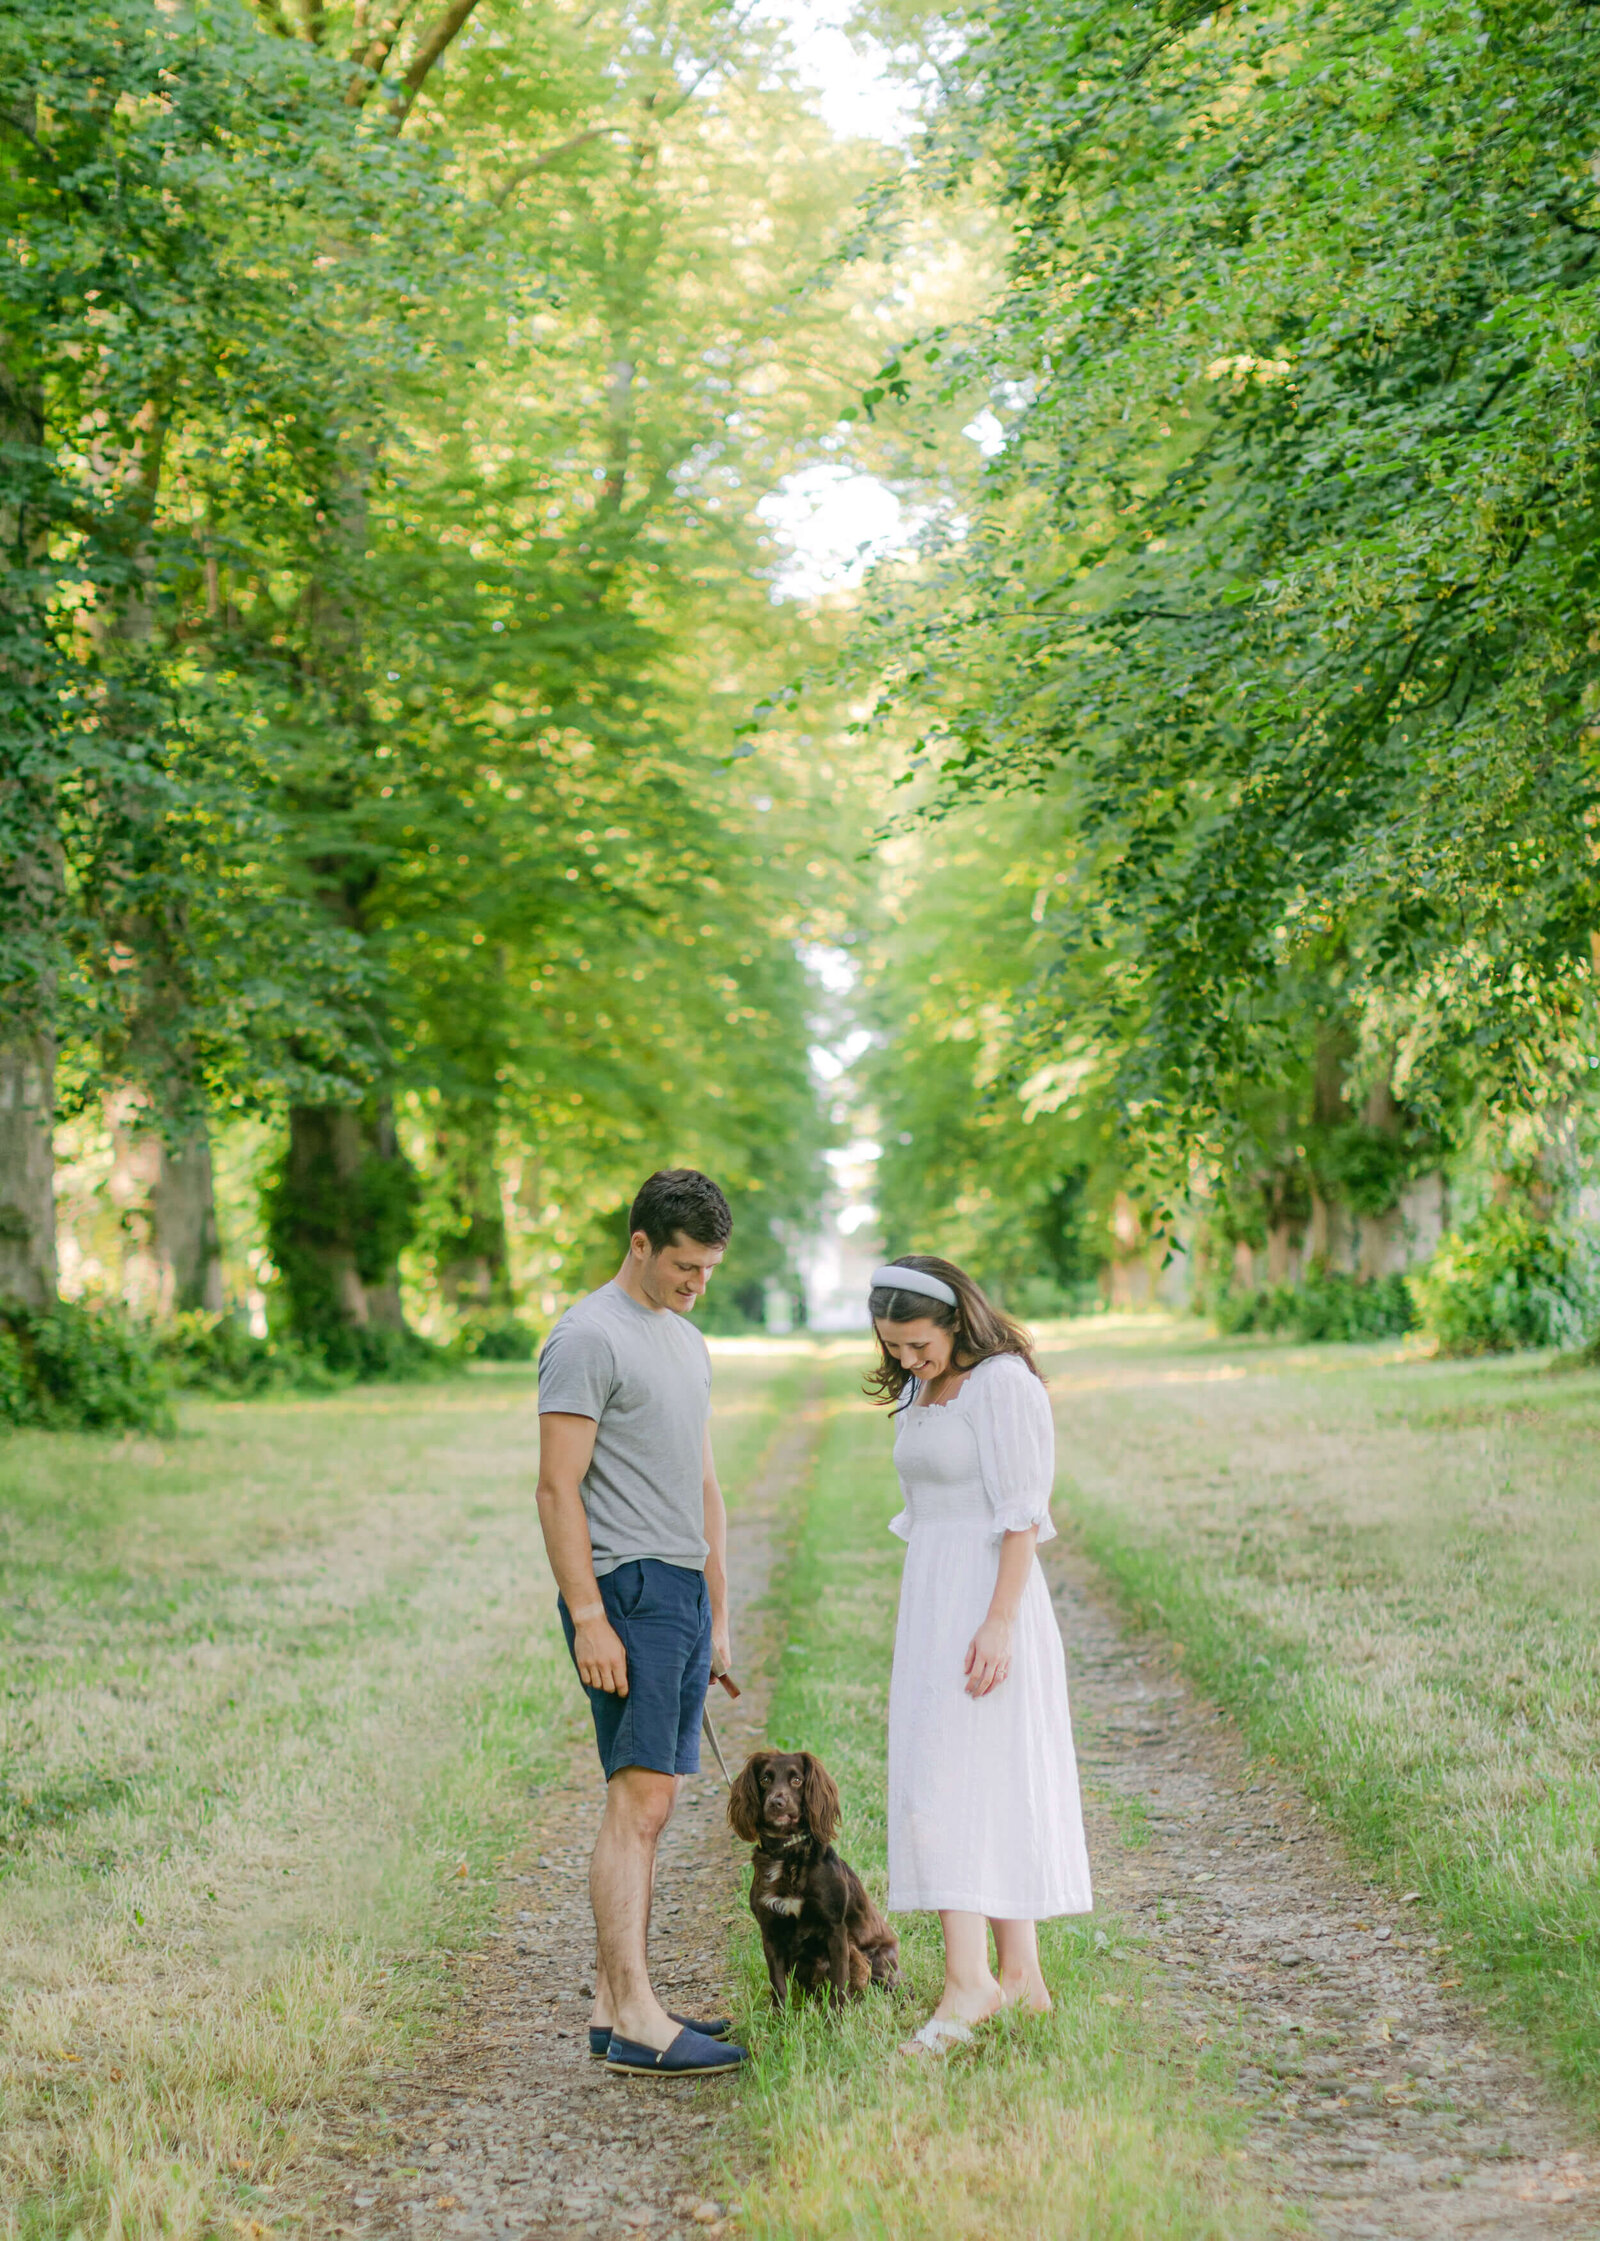 chloe-winstanley-engagement-couples-shoot-countryside-spaniel